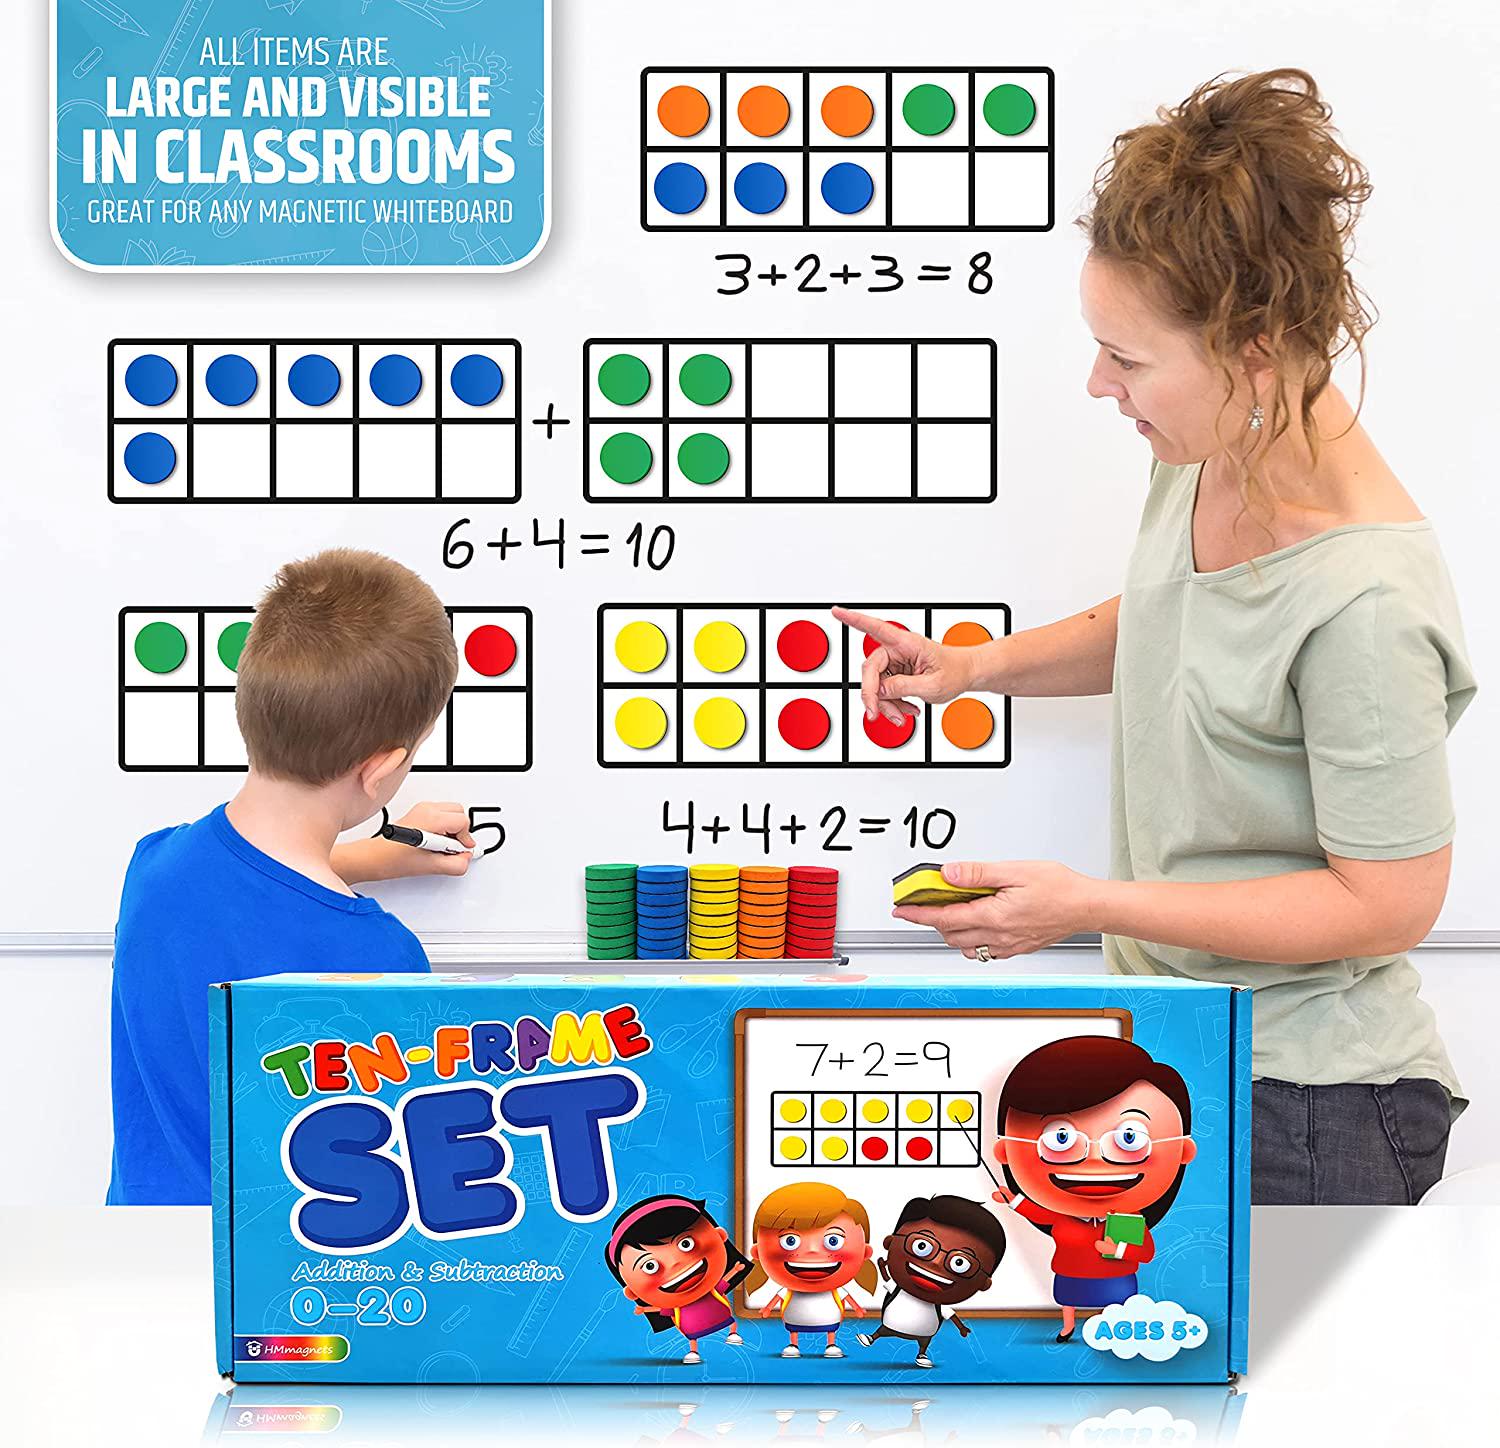 HMmagnets, Magnetic Ten Frame Set (203 Items): 8 Ten-Frames + 100 Colorful Counters + 10 Dice + 80 Math Flash Cards - Addition and Subtraction - Math Manipulatives Kit for Home, Kindergarten and Elementary Teachers